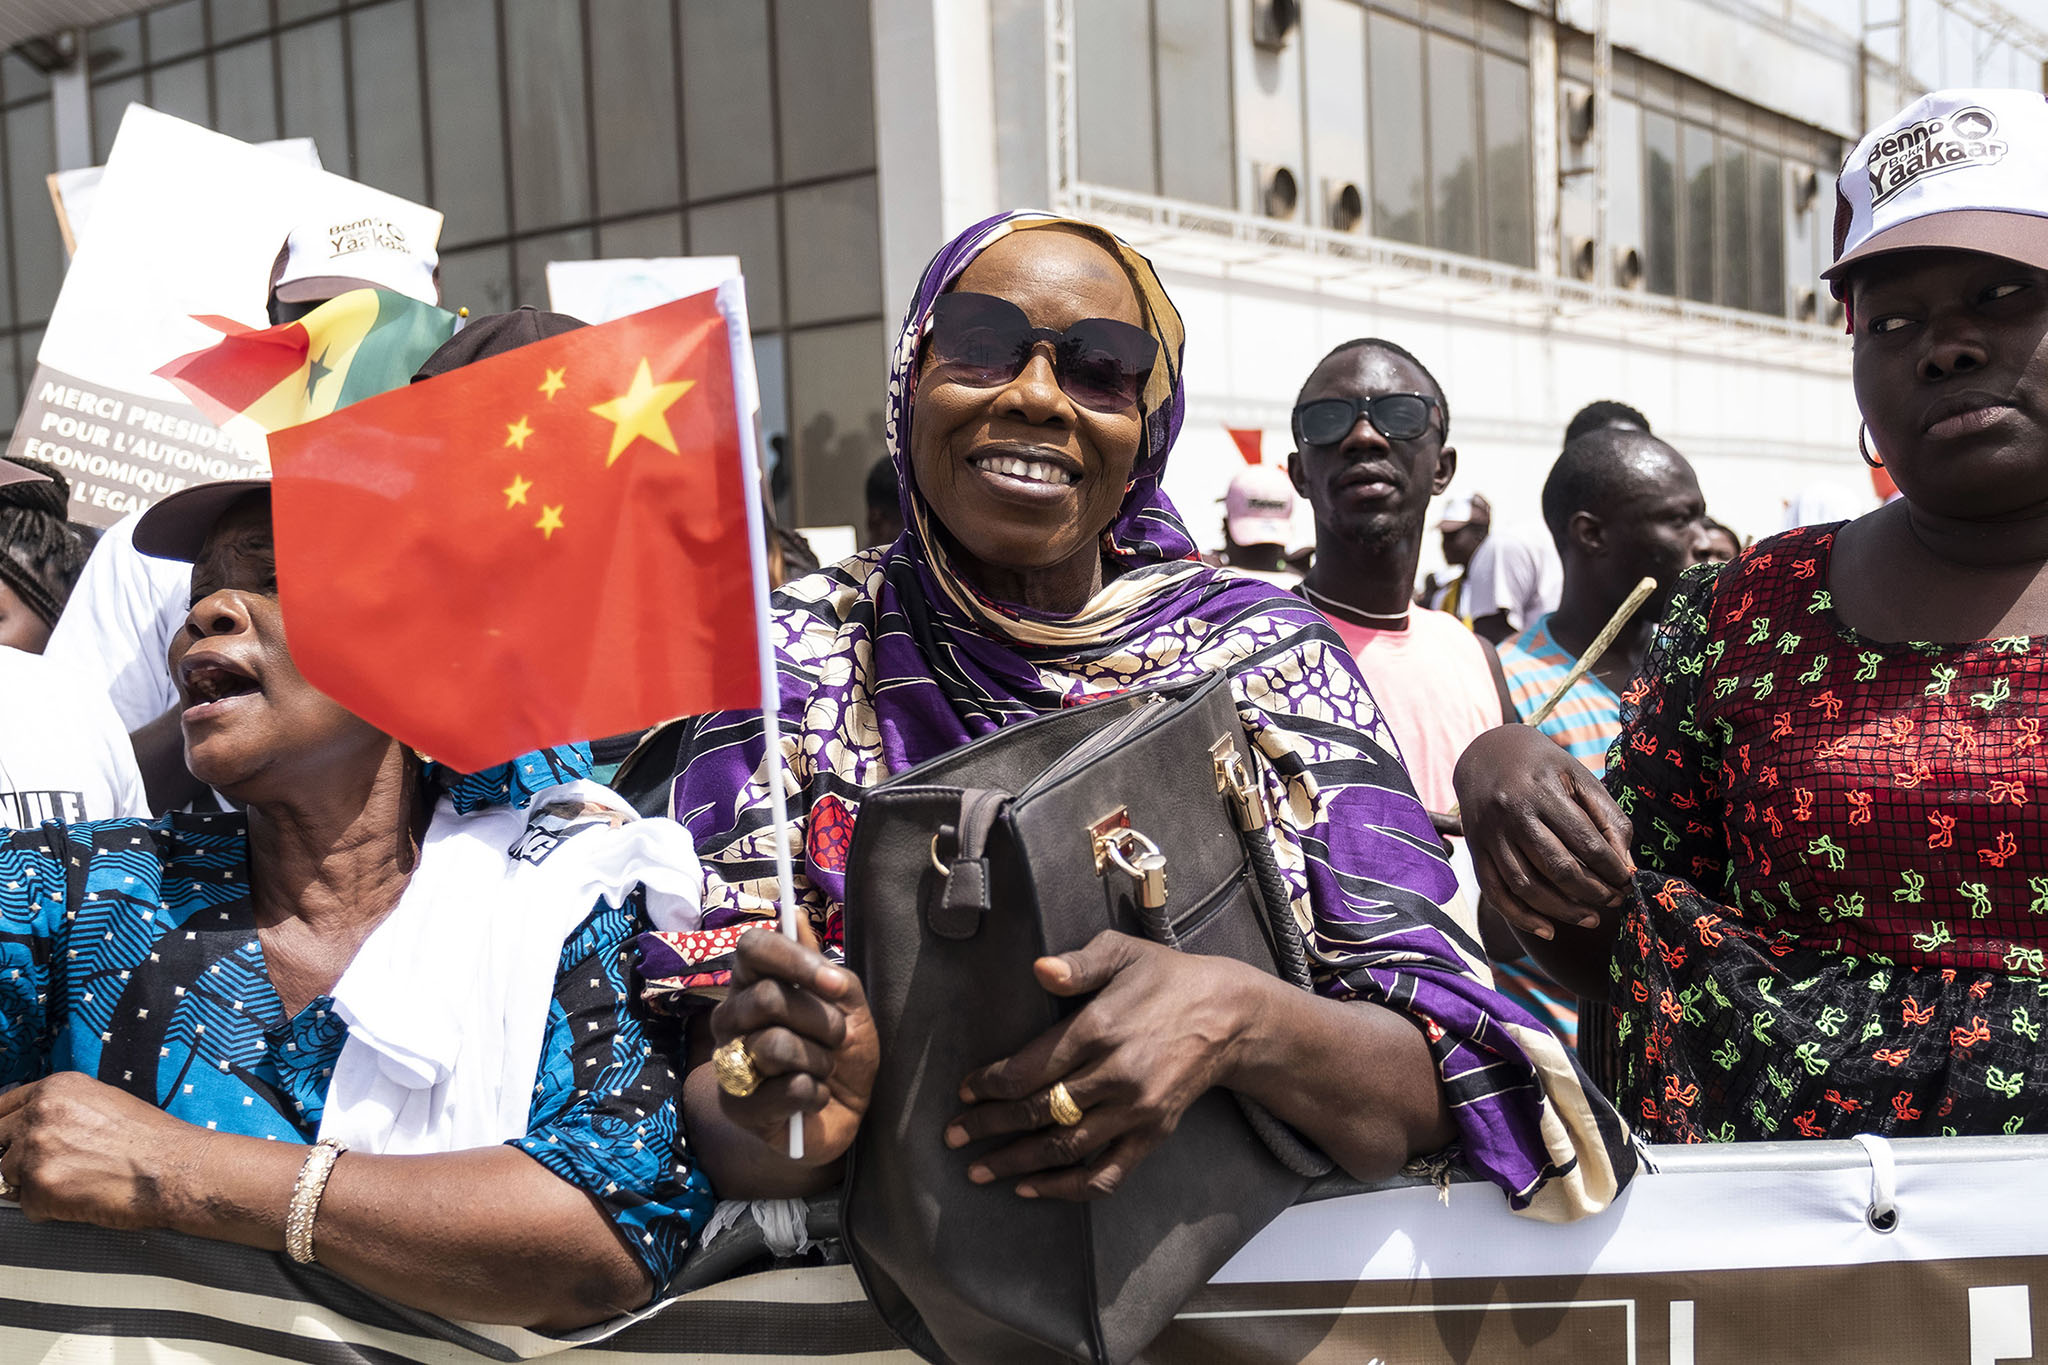 People in Senegal welcome Chinese leader Xi Jinping during his visit to Dakar on July 21, 2018. (Photo by Xaumem Olleros/AP)